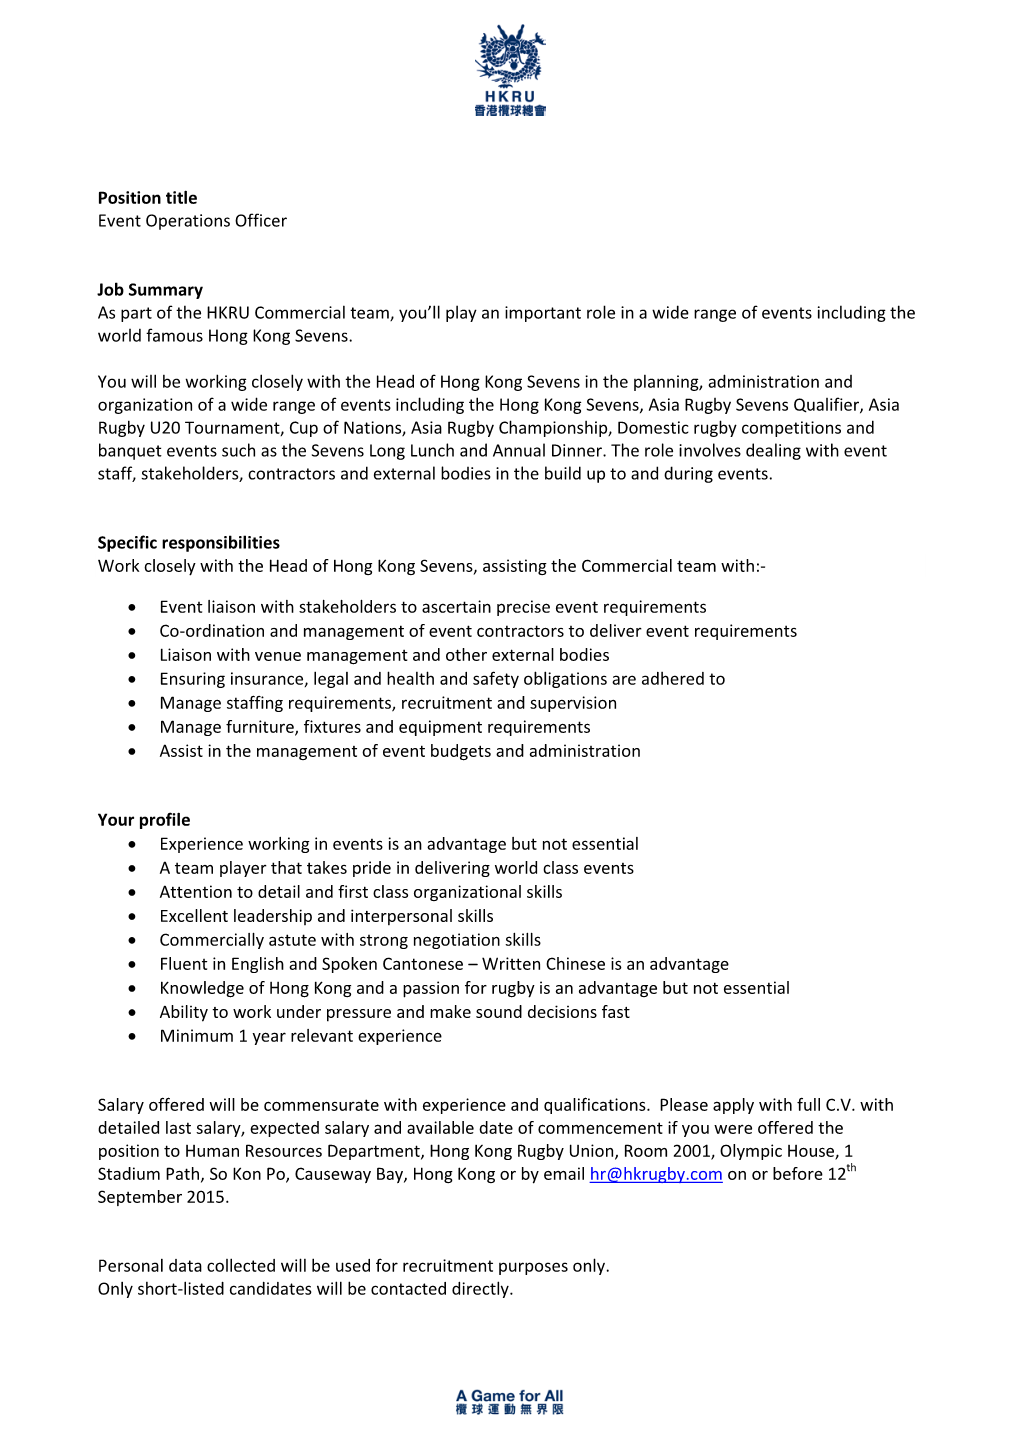 Position Title Event Operations Officer Job Summary As Part of the HKRU